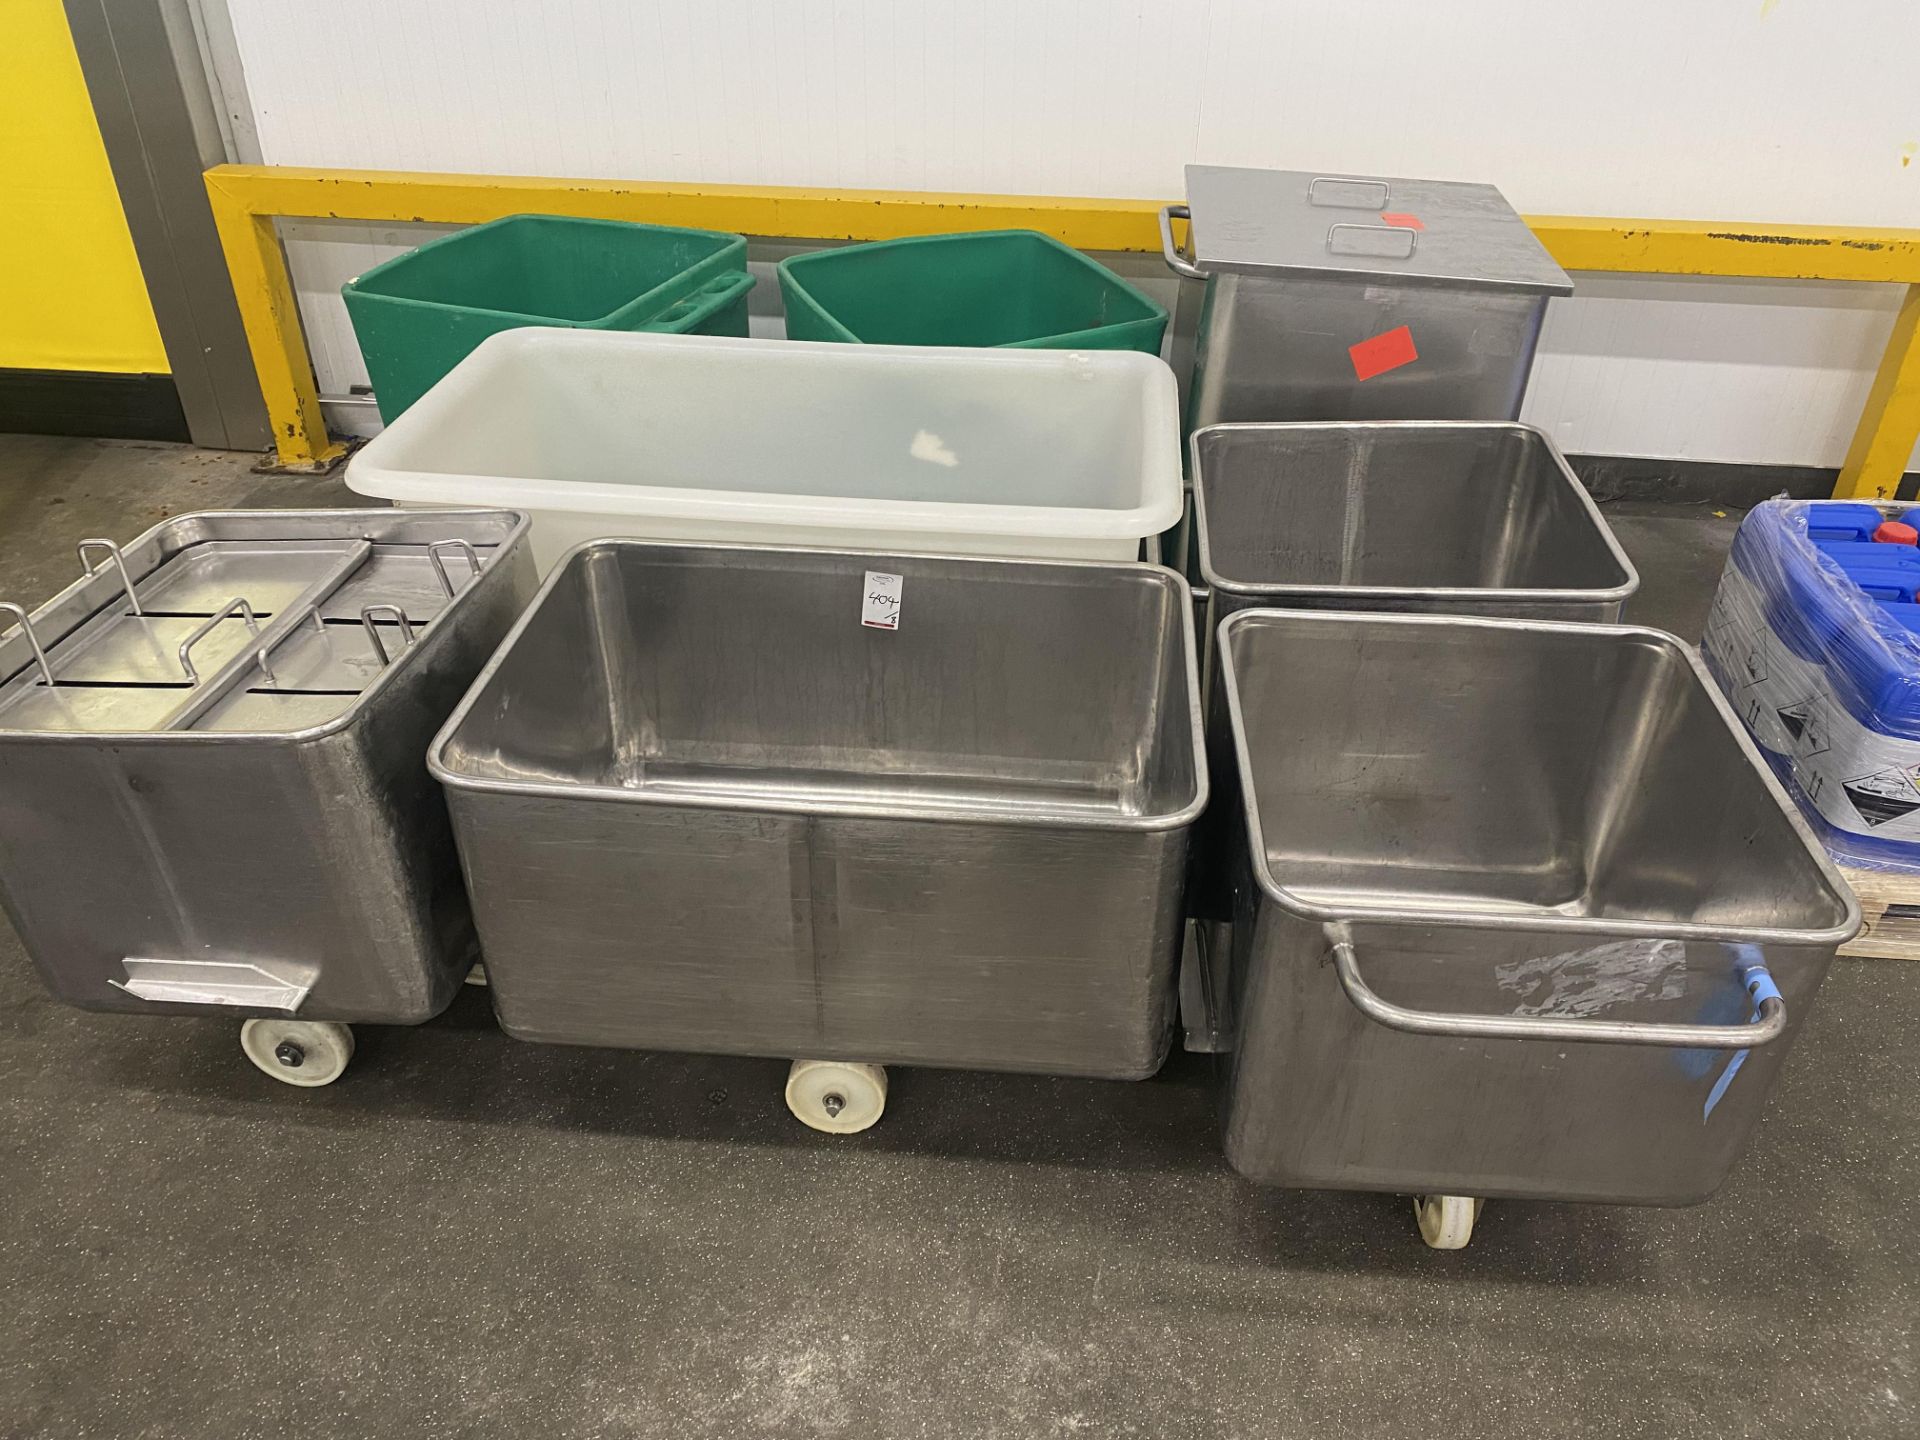 5 Various stainless steel mobile lifting bins complete with 2 mobile plastic lifting bins and a